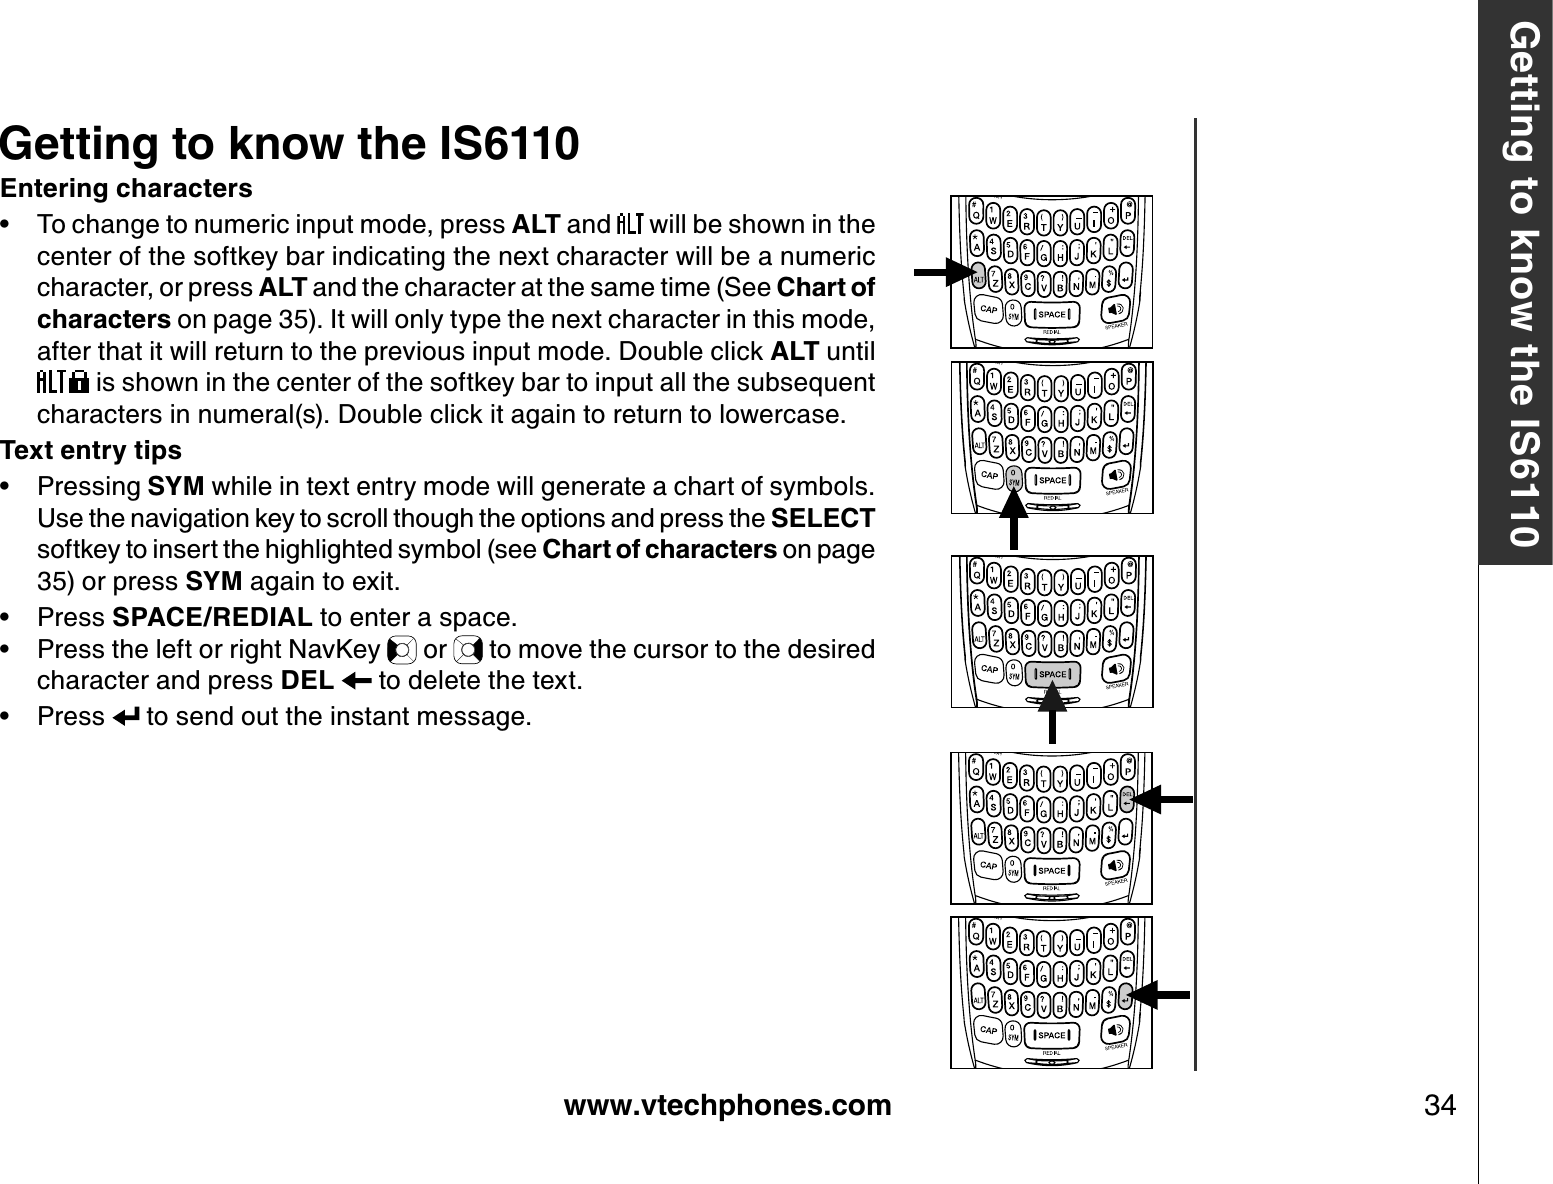 www.vtechphones.com 34Getting to know the IS6110Entering charactersTo change to numeric input mode, press ALT and   will be shown in the center of the softkey bar indicating the next character will be a numeric character, or press ALT and the character at the same time (See Chart of characters on page 35). It will only type the next character in this mode, after that it will return to the previous input mode. Double click ALT until  is shown in the center of the softkey bar to input all the subsequent characters in numeral(s). Double click it again to return to lowercase.Text entry tipsPressing SYM while in text entry mode will generate a chart of symbols. Use the navigation key to scroll though the options and press the SELECTsoftkey to insert the highlighted symbol (see Chart of characters on page 35) or press SYM again to exit.Press SPACE/REDIAL to enter a space. Press the left or right NavKey   or   to move the cursor to the desired character and press DEL   to delete the text.Press   to send out the instant message.•••••Getting to know the IS6110